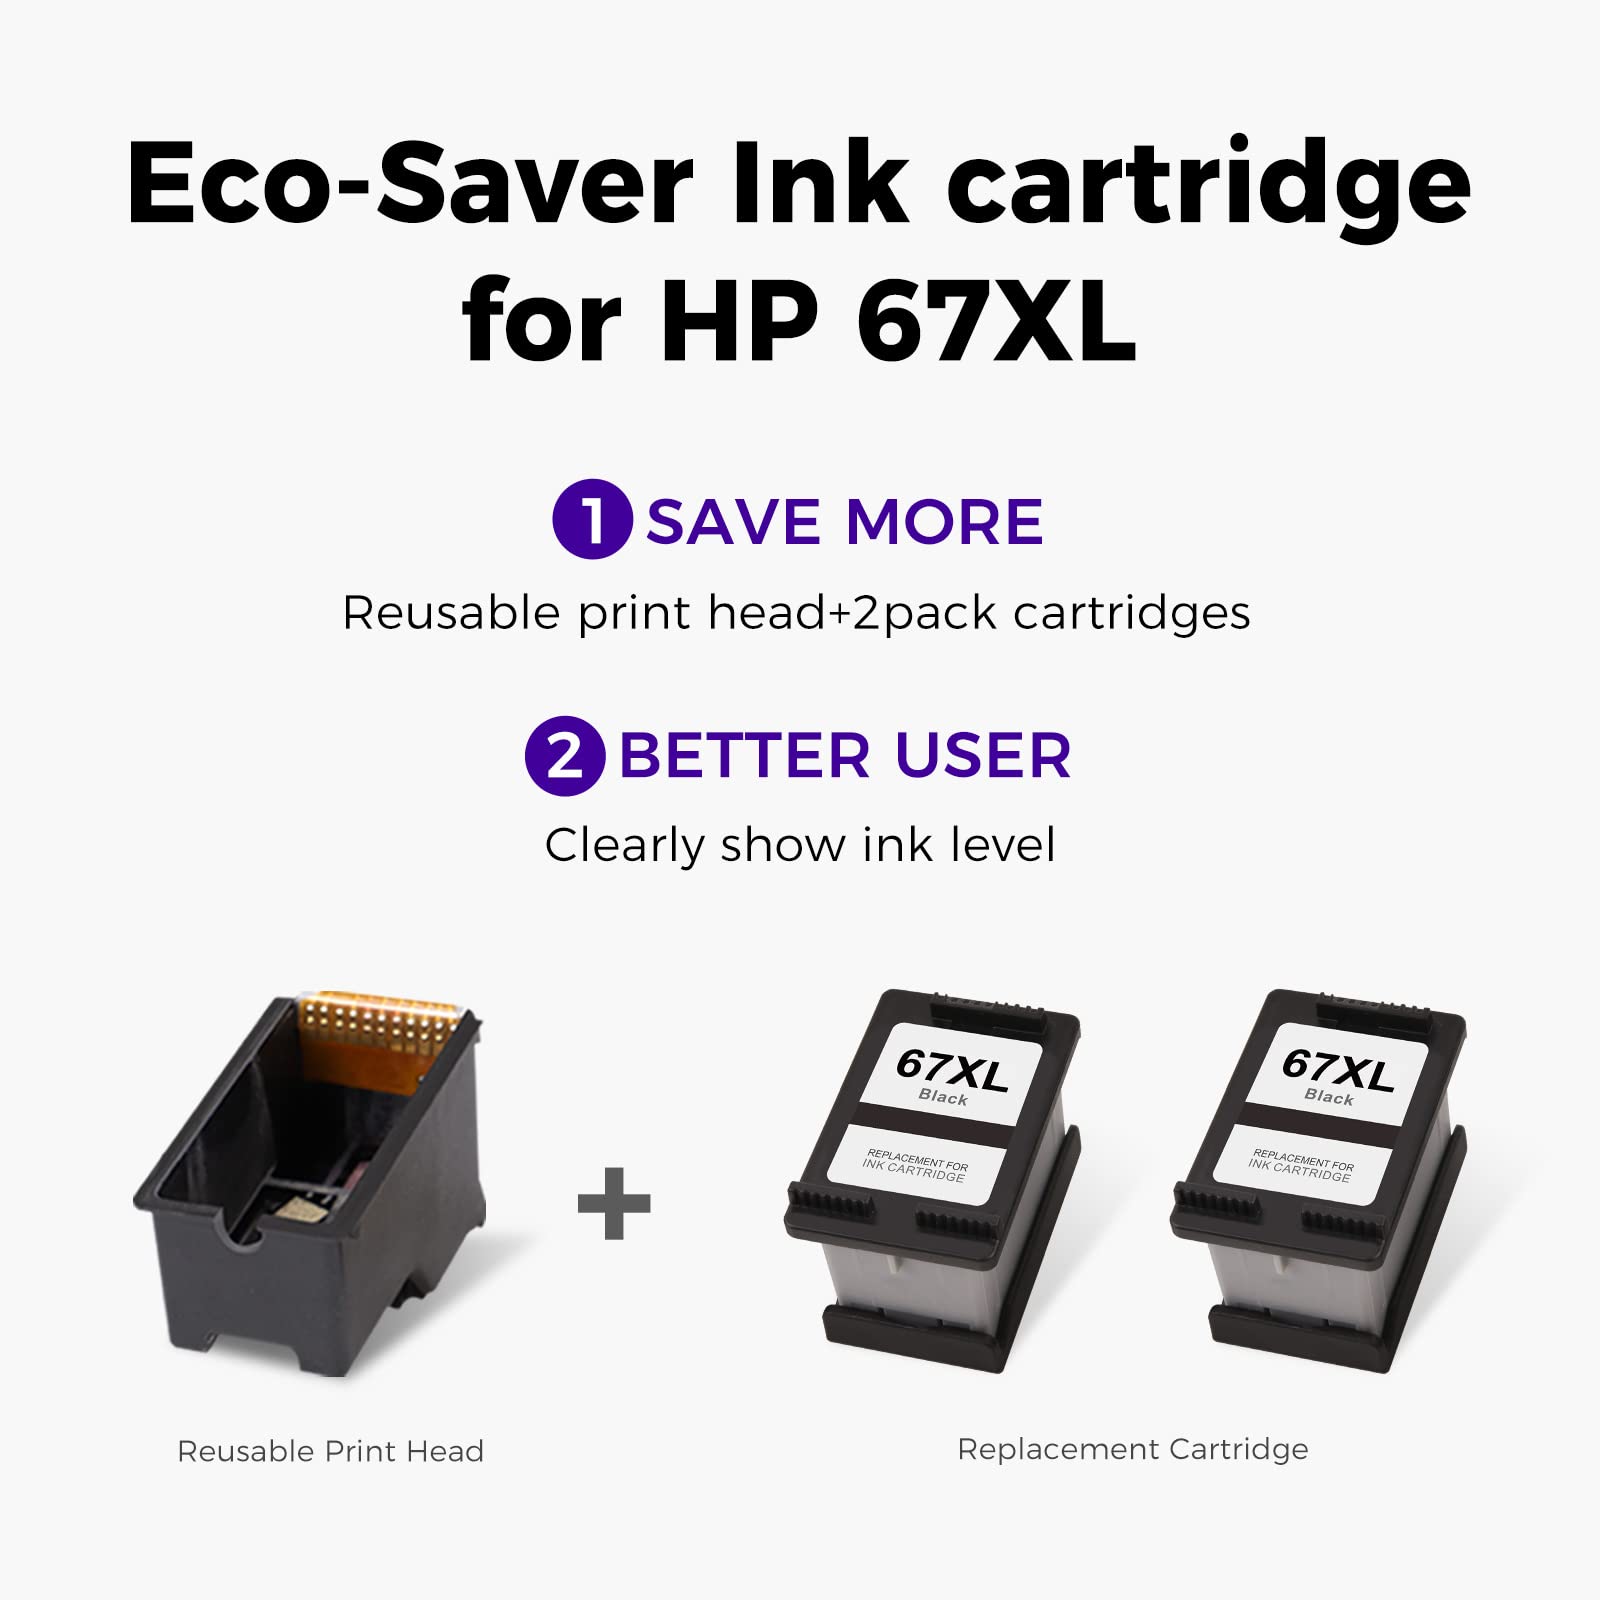 Eco-Saver HP 67XL ink cartridge combo pack showcasing reusable print head and two black ink cartridges to save more and enhance user experience.